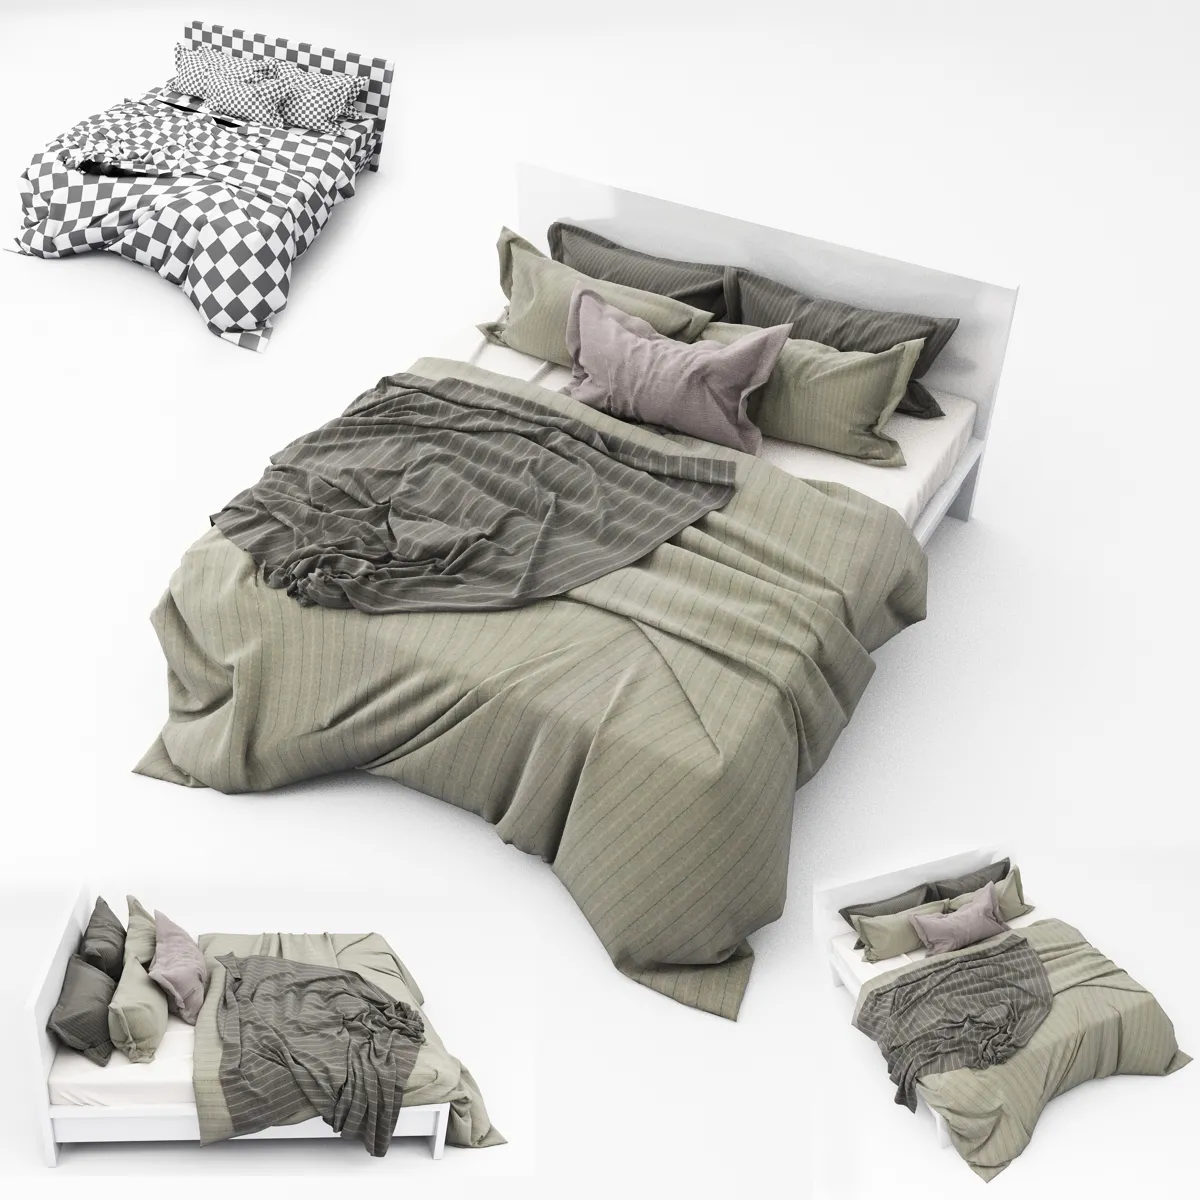 3DS MAX – Bed – 2662